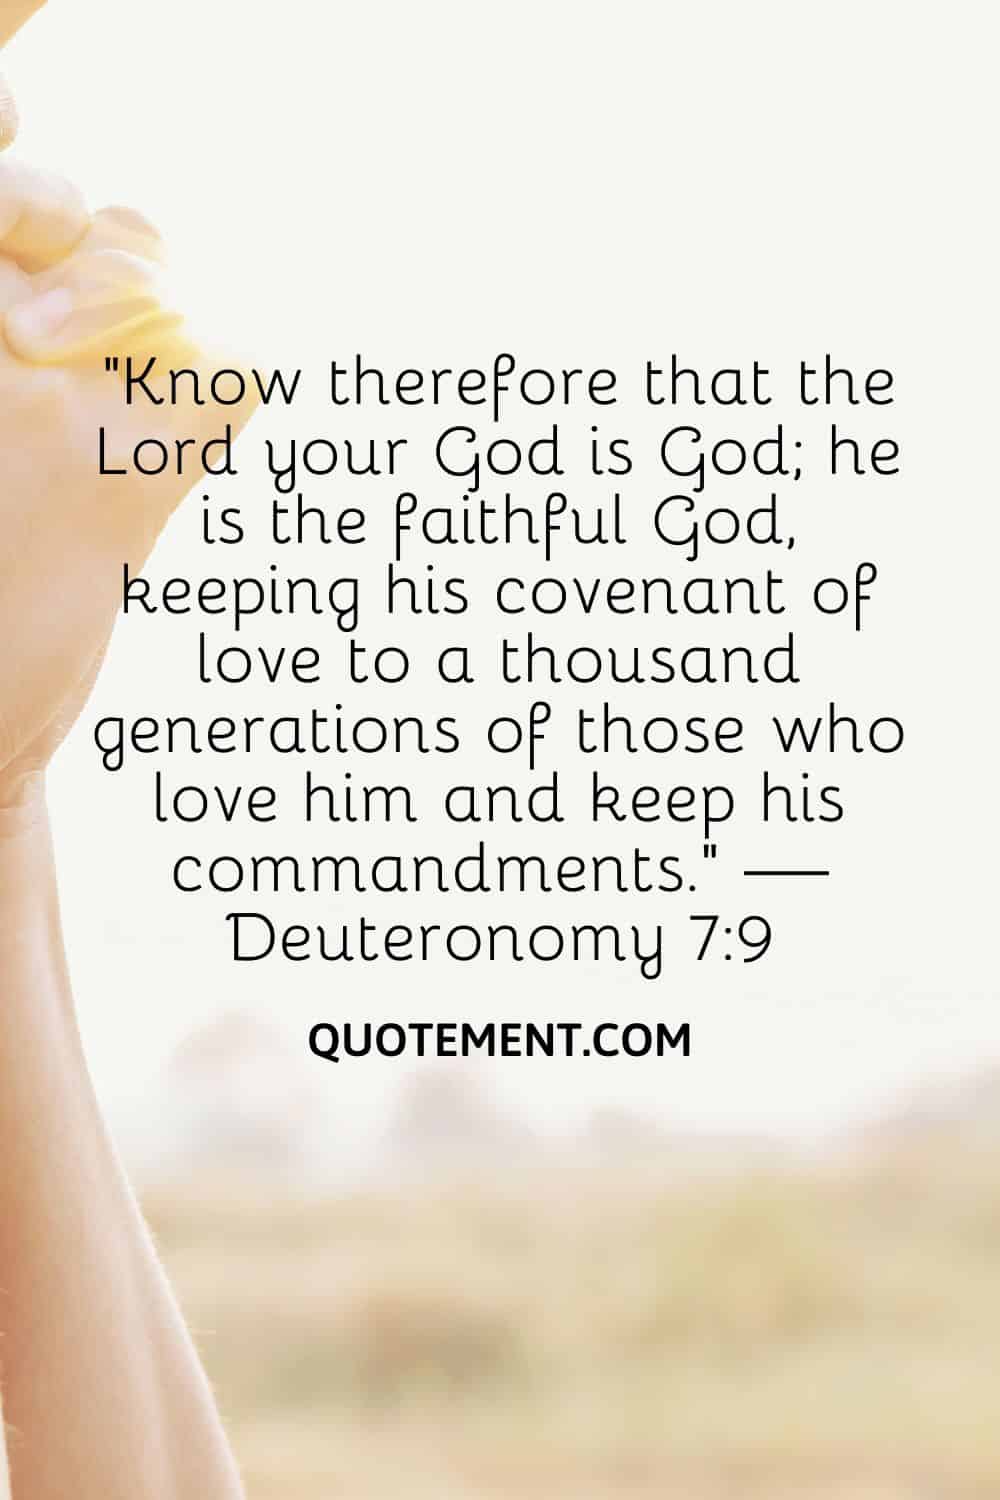 “Know therefore that the Lord your God is God; he is the faithful God, keeping his covenant of love to a thousand generations of those who love him and keep his commandments.” — Deuteronomy 79